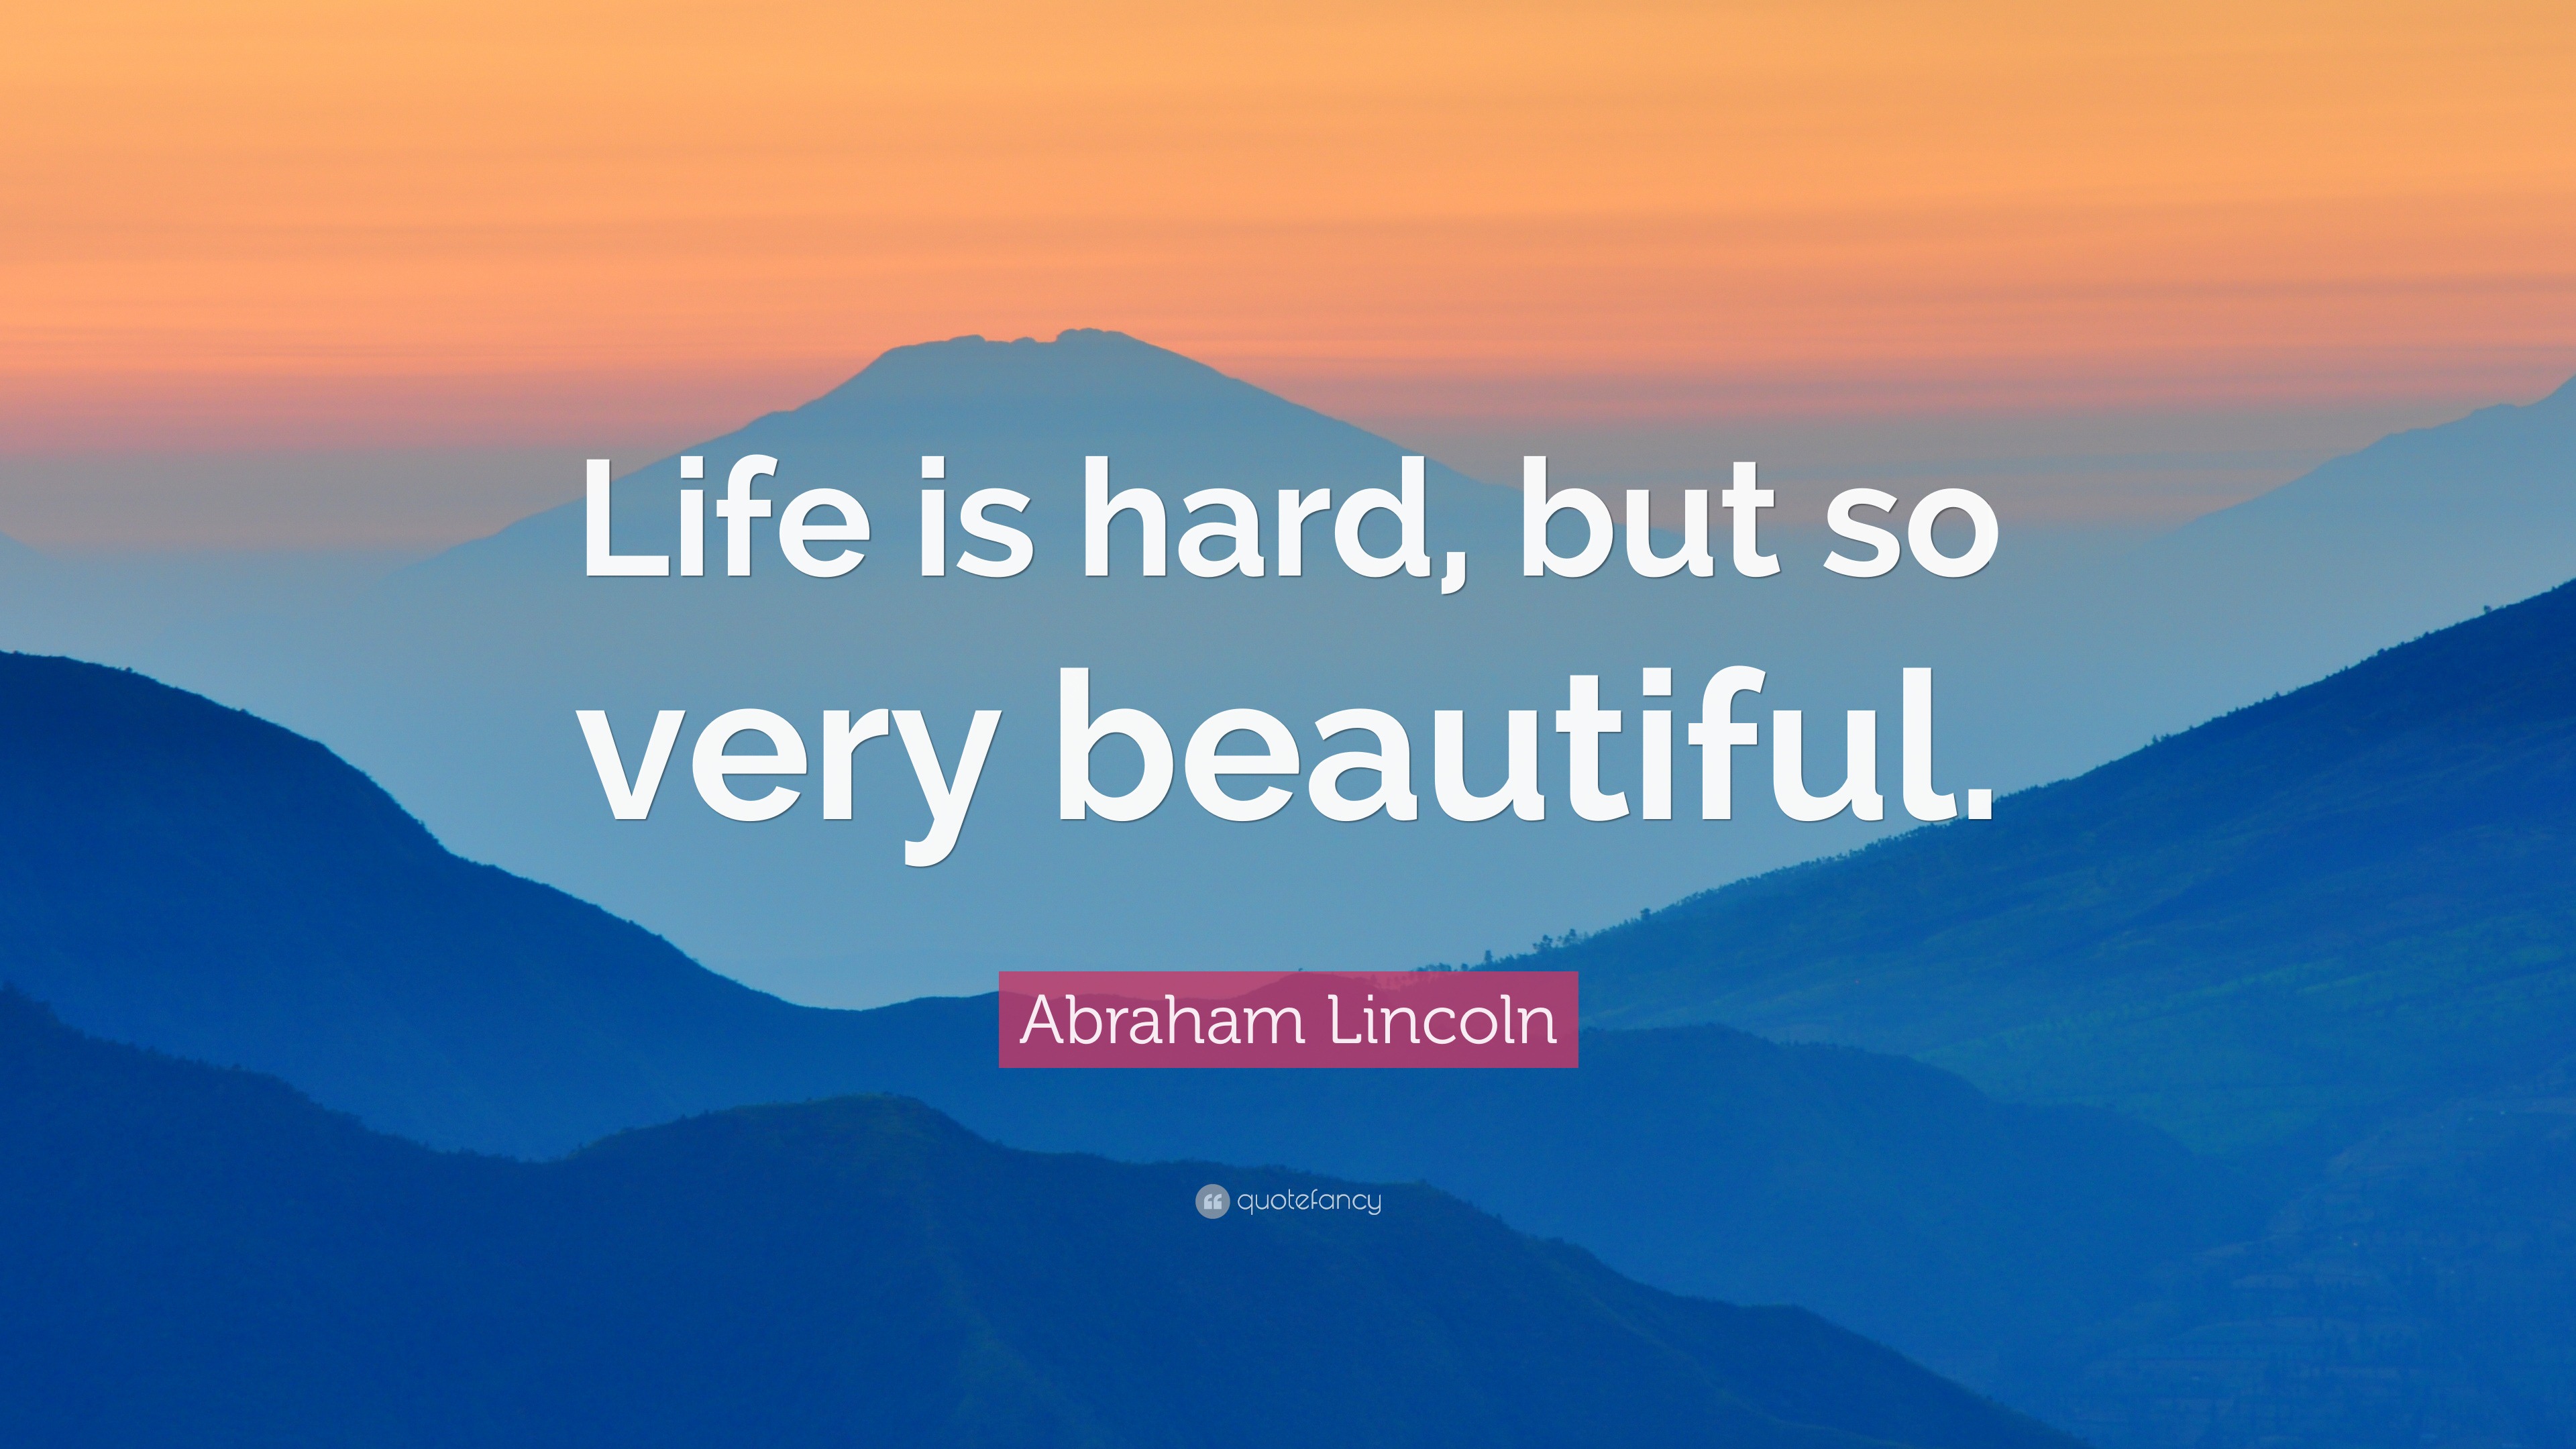 Abraham Lincoln Quote “Life is hard but so very beautiful ”